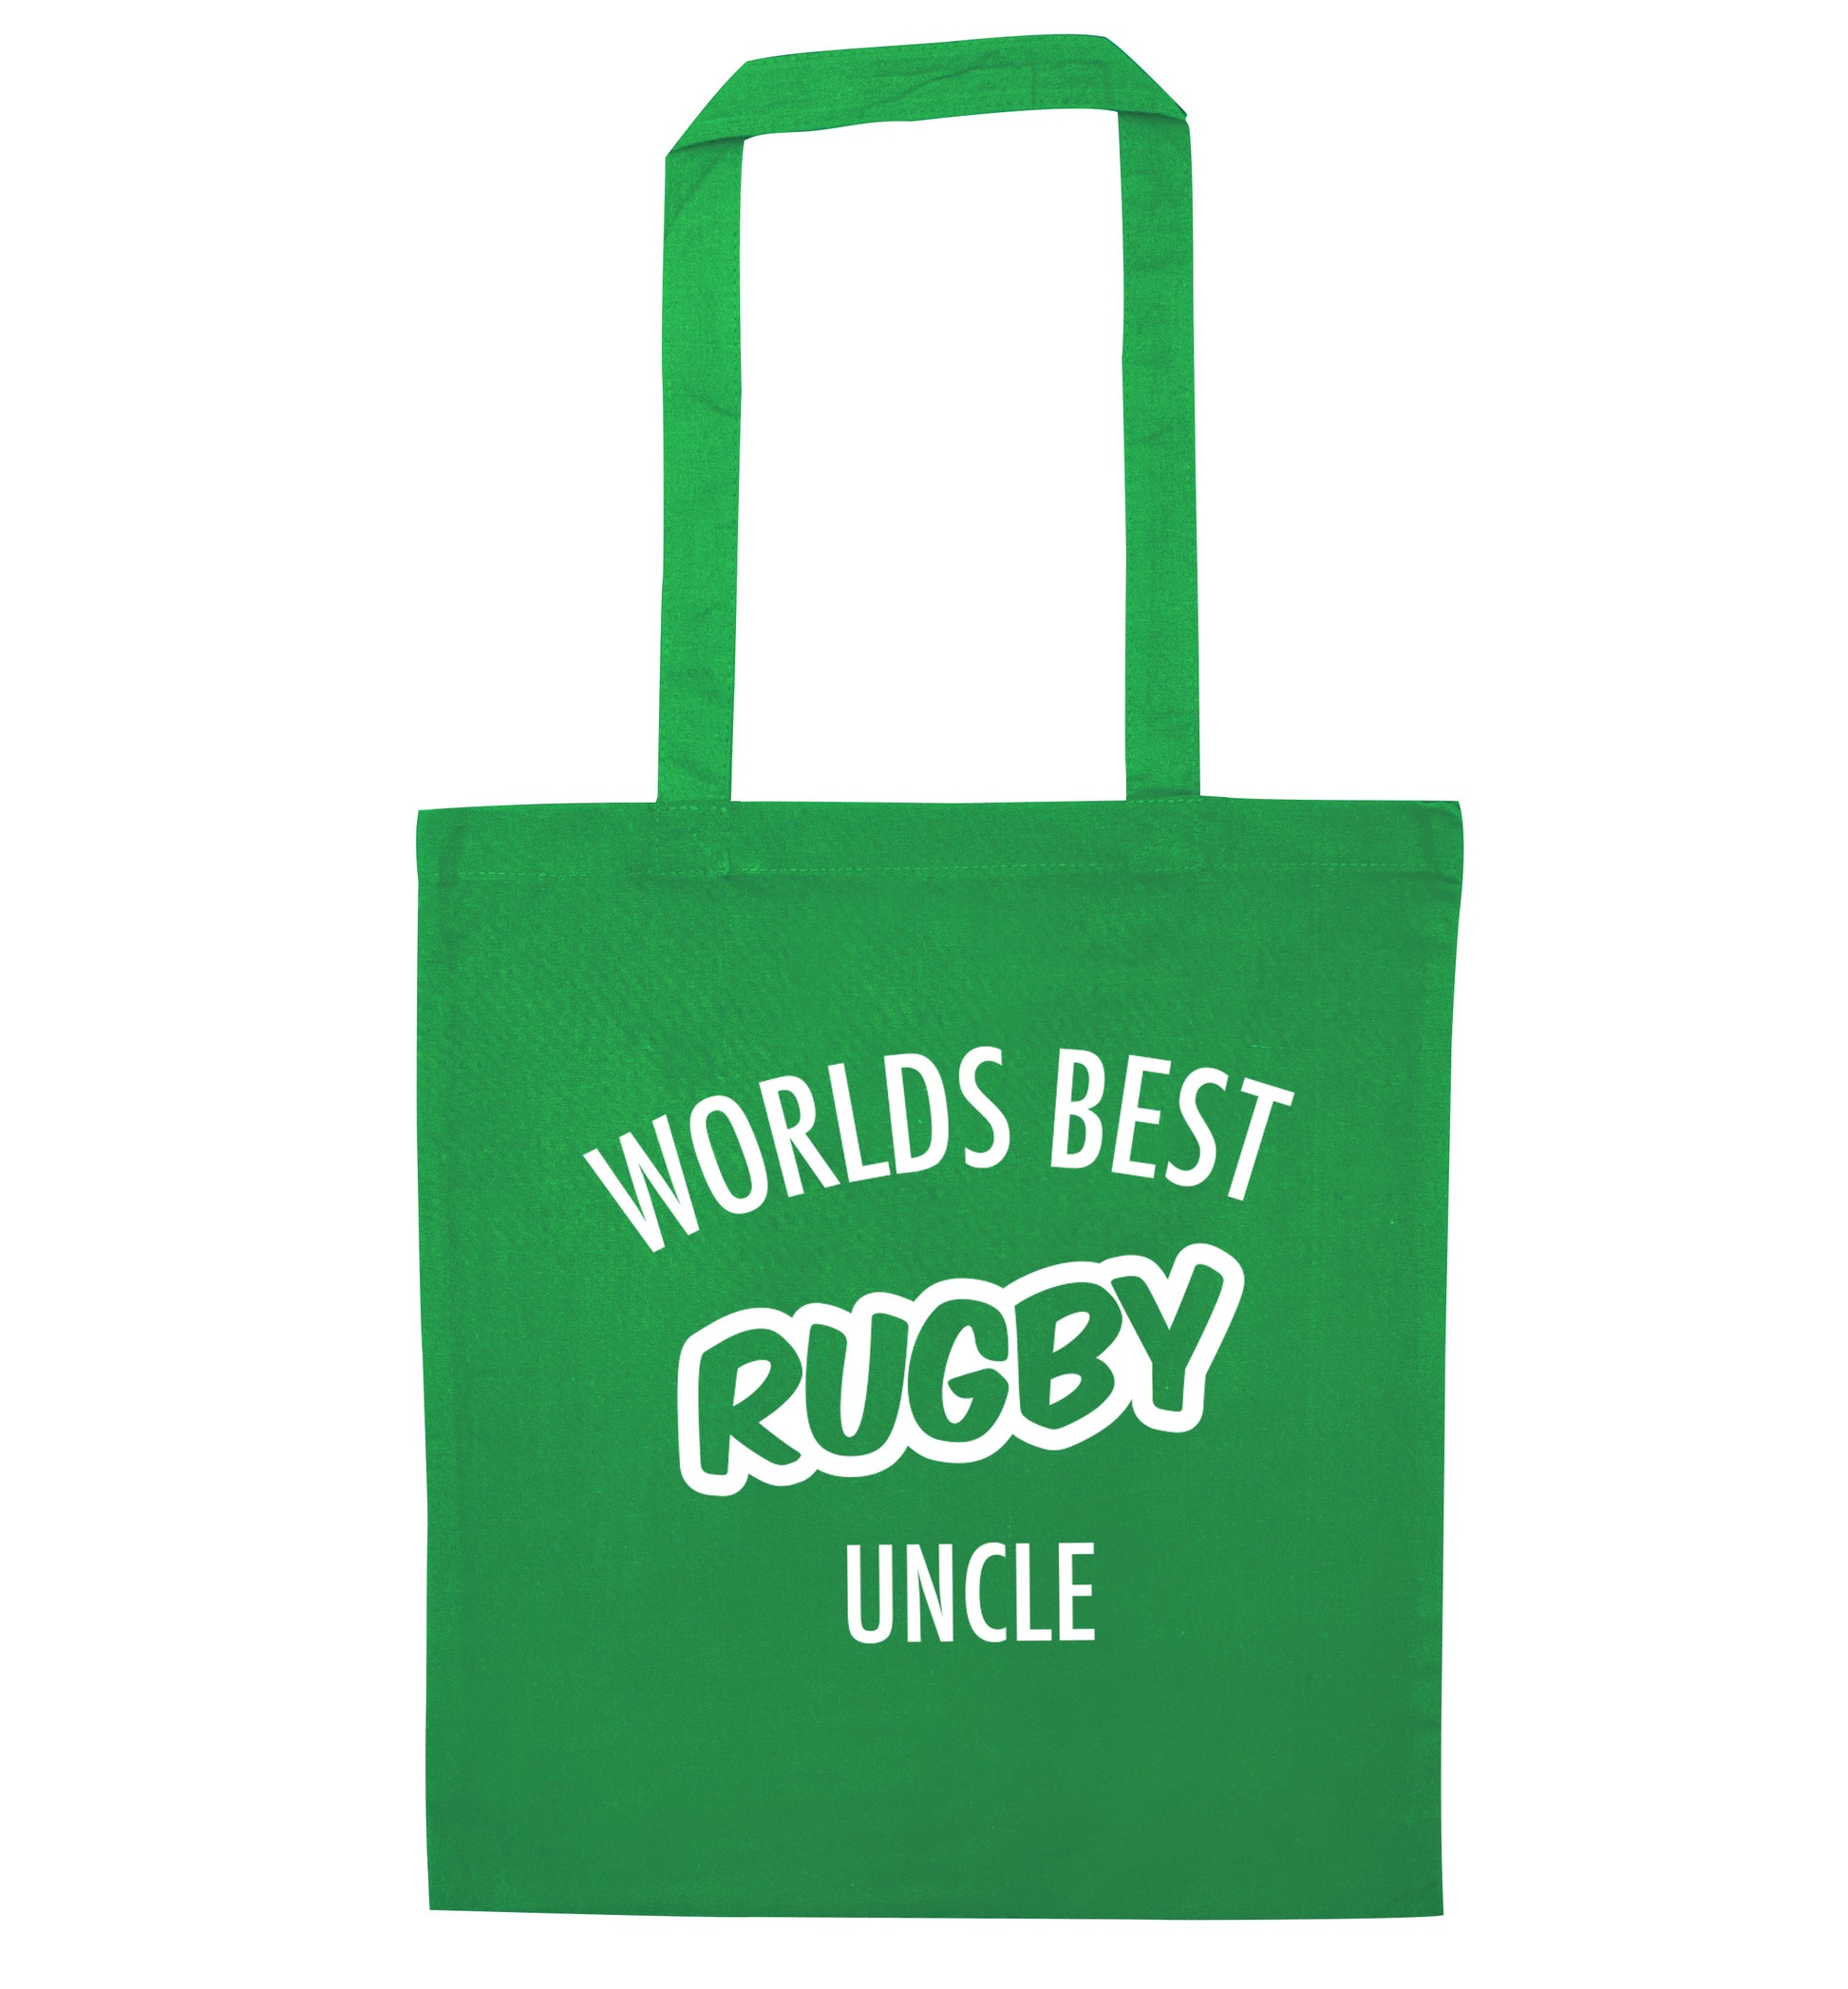 Worlds best rugby uncle green tote bag